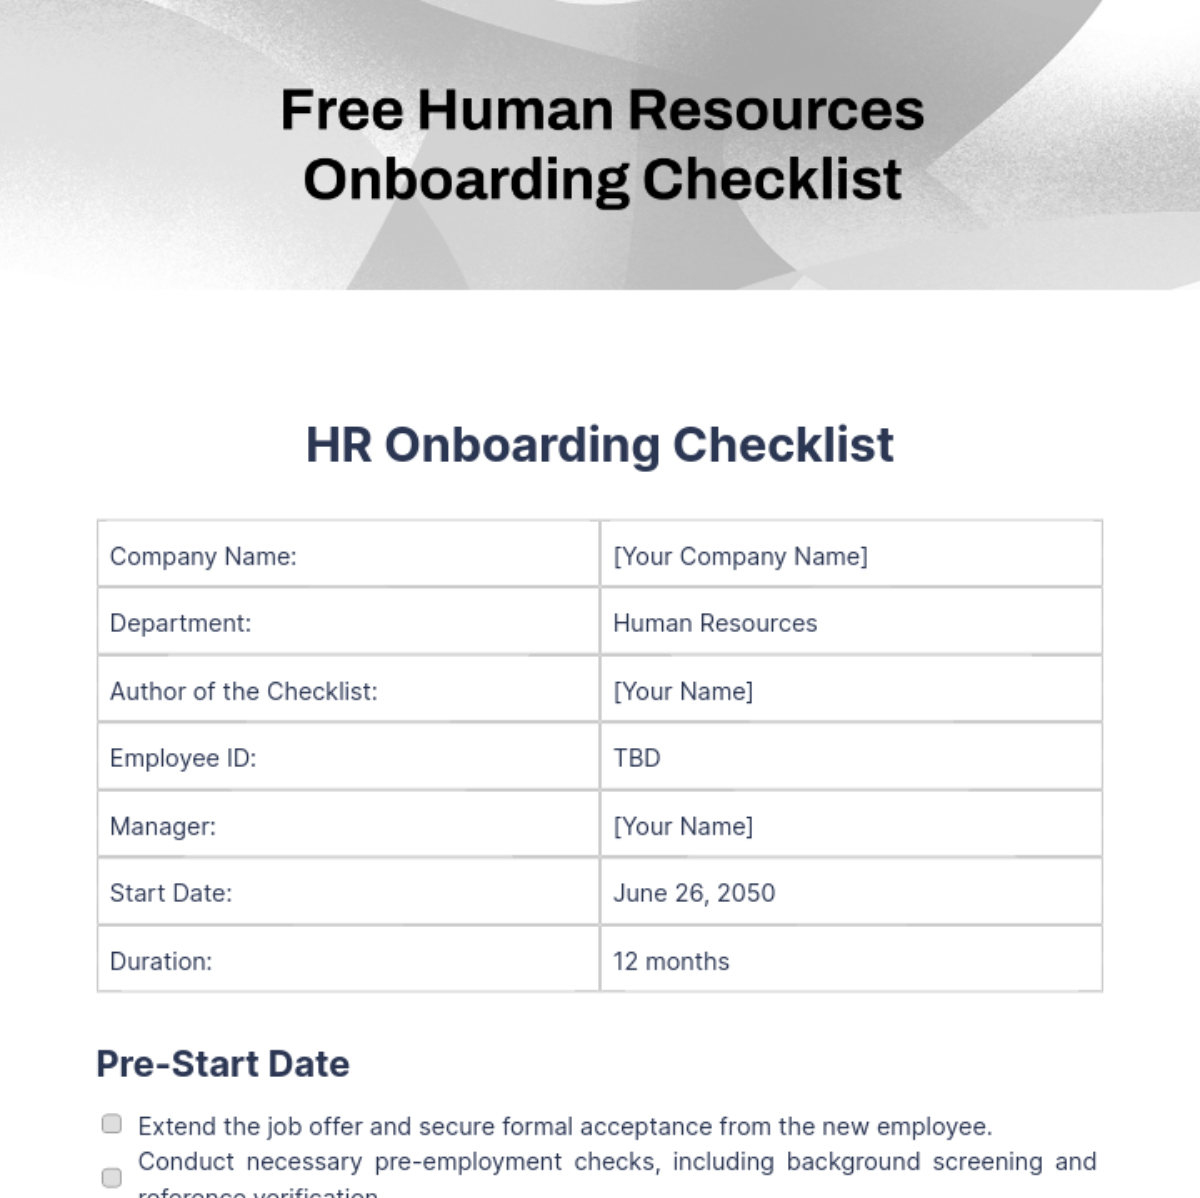 Free Human Resources Onboarding Checklist Template